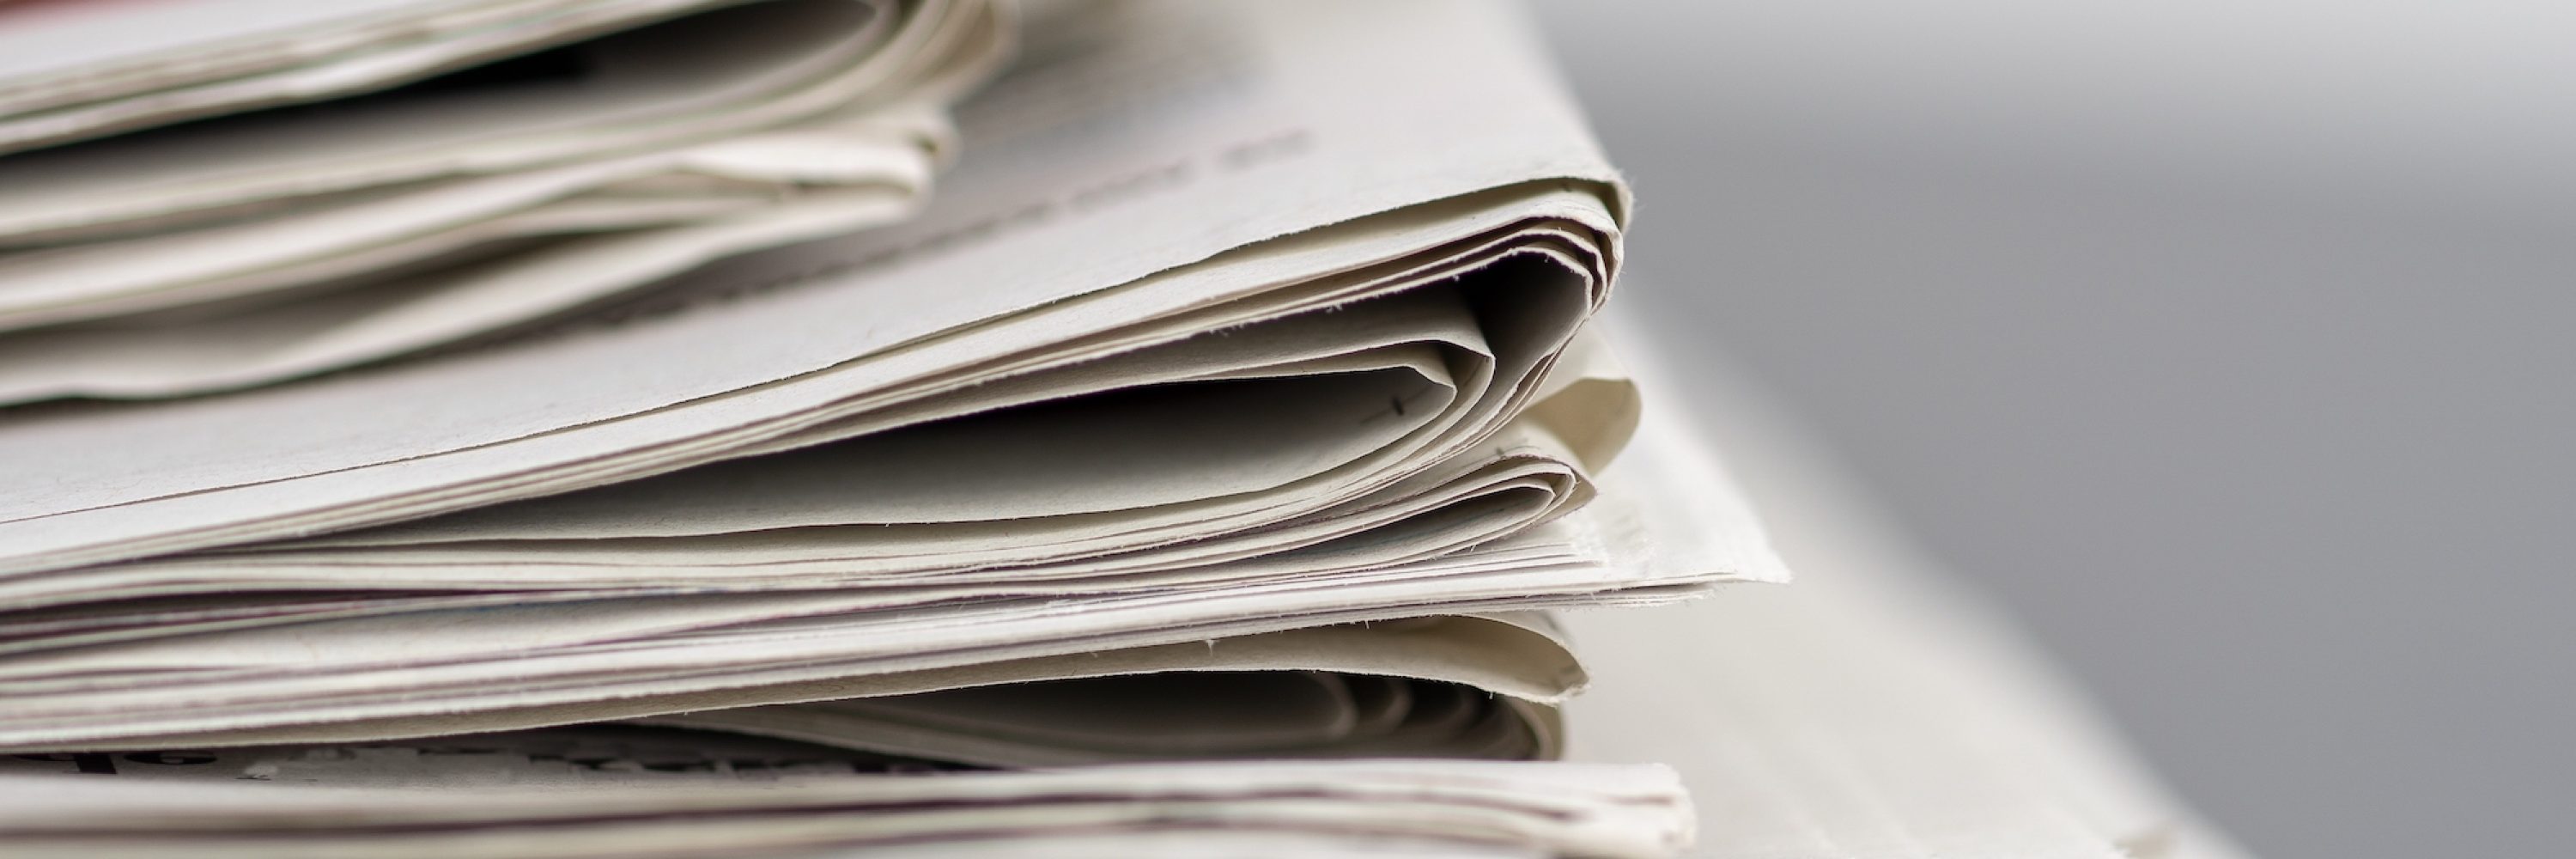 A closeup shot of several newspapers stacked on top of each other